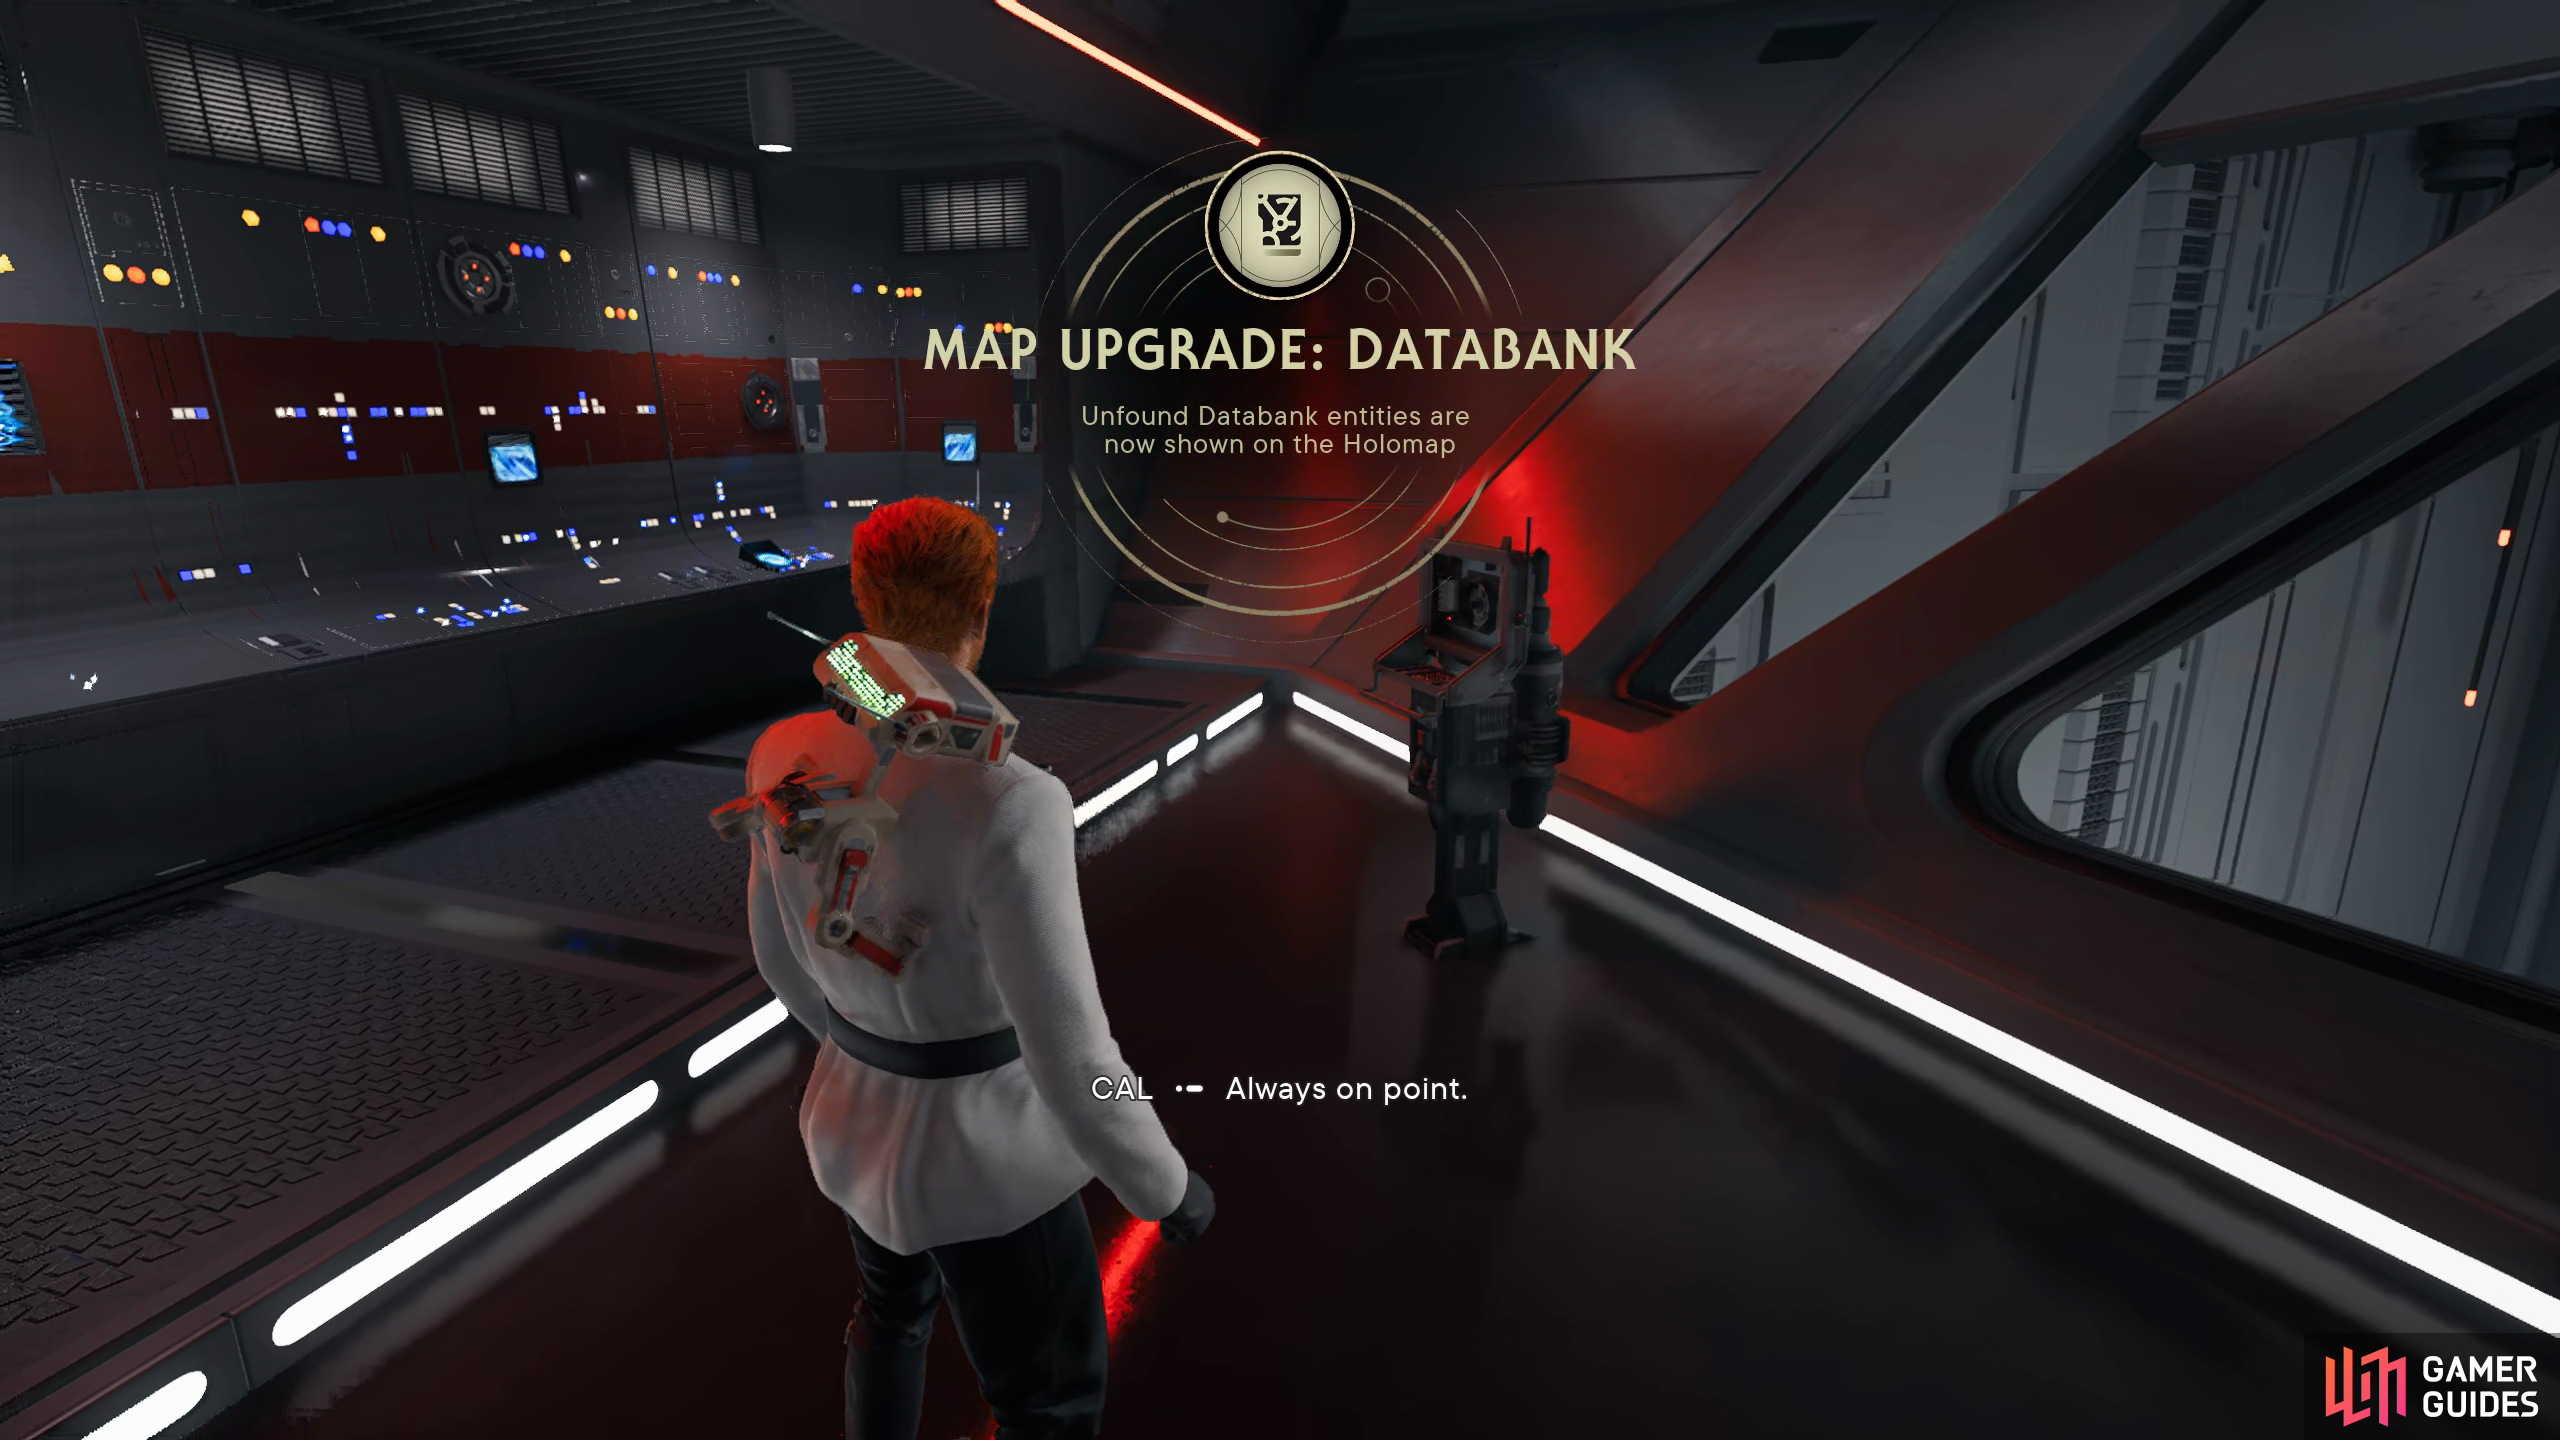 Here is how to get all the Star Wars Jedi Survivor Map Upgrades.